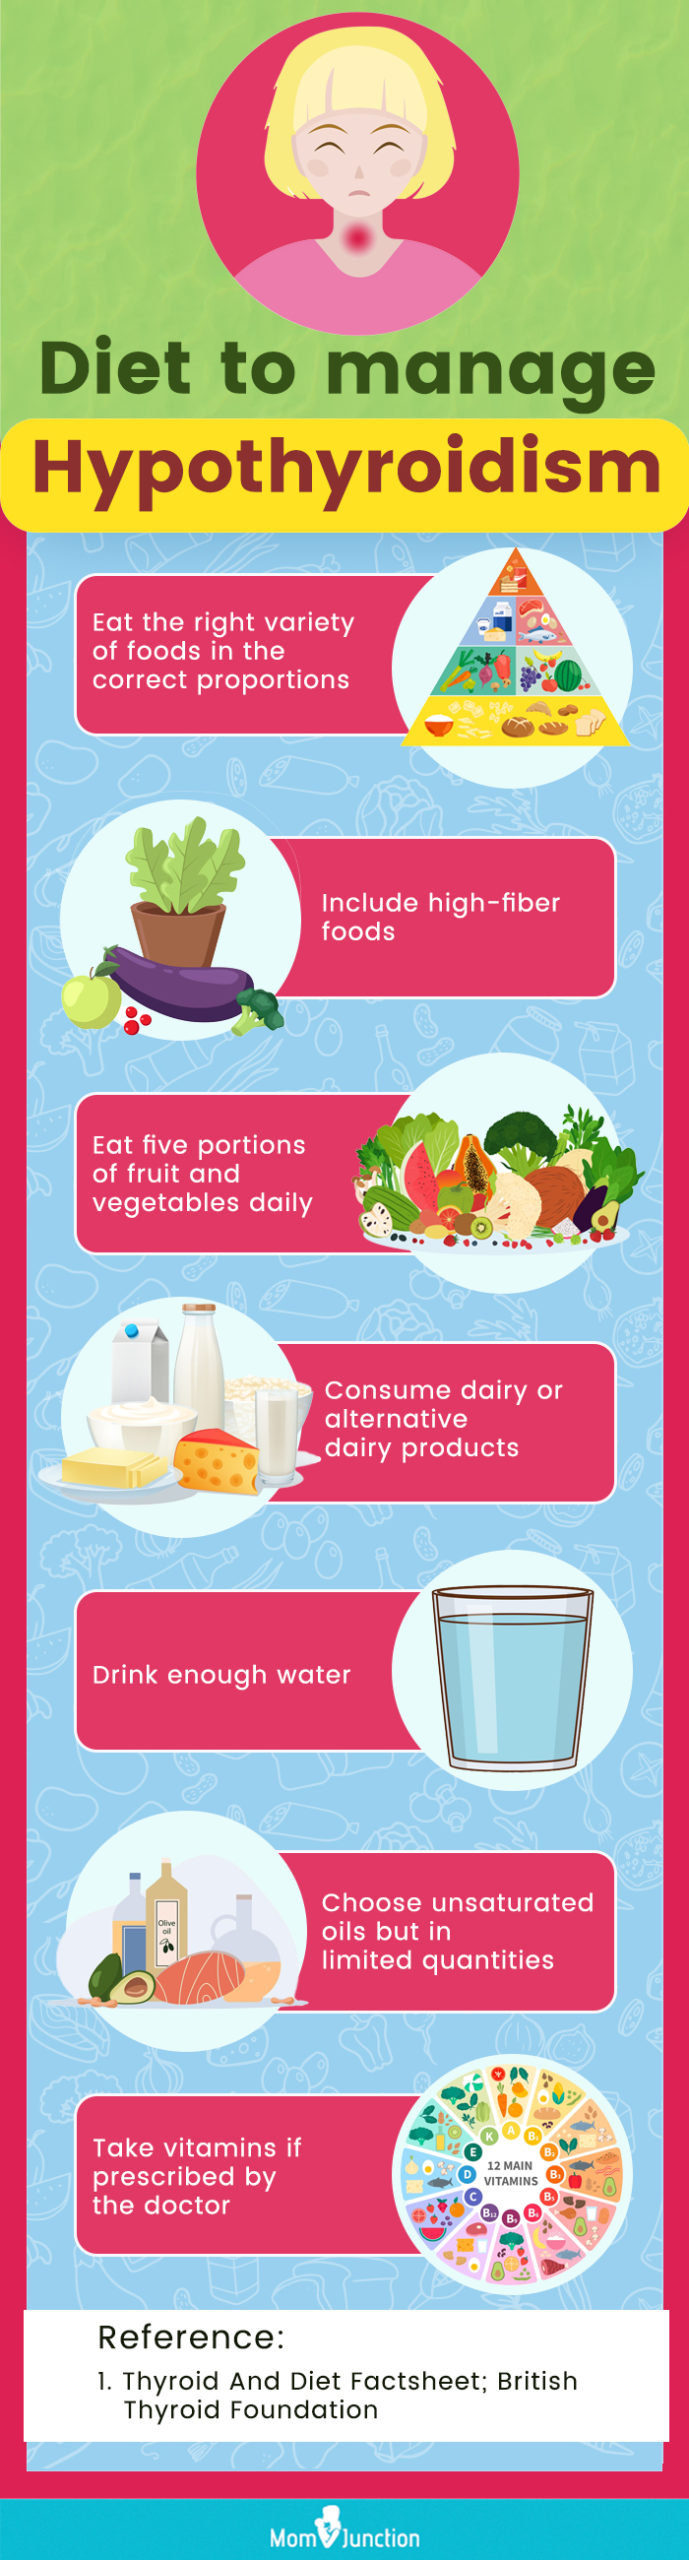 diet to manage Hypothyroidism (infographic)